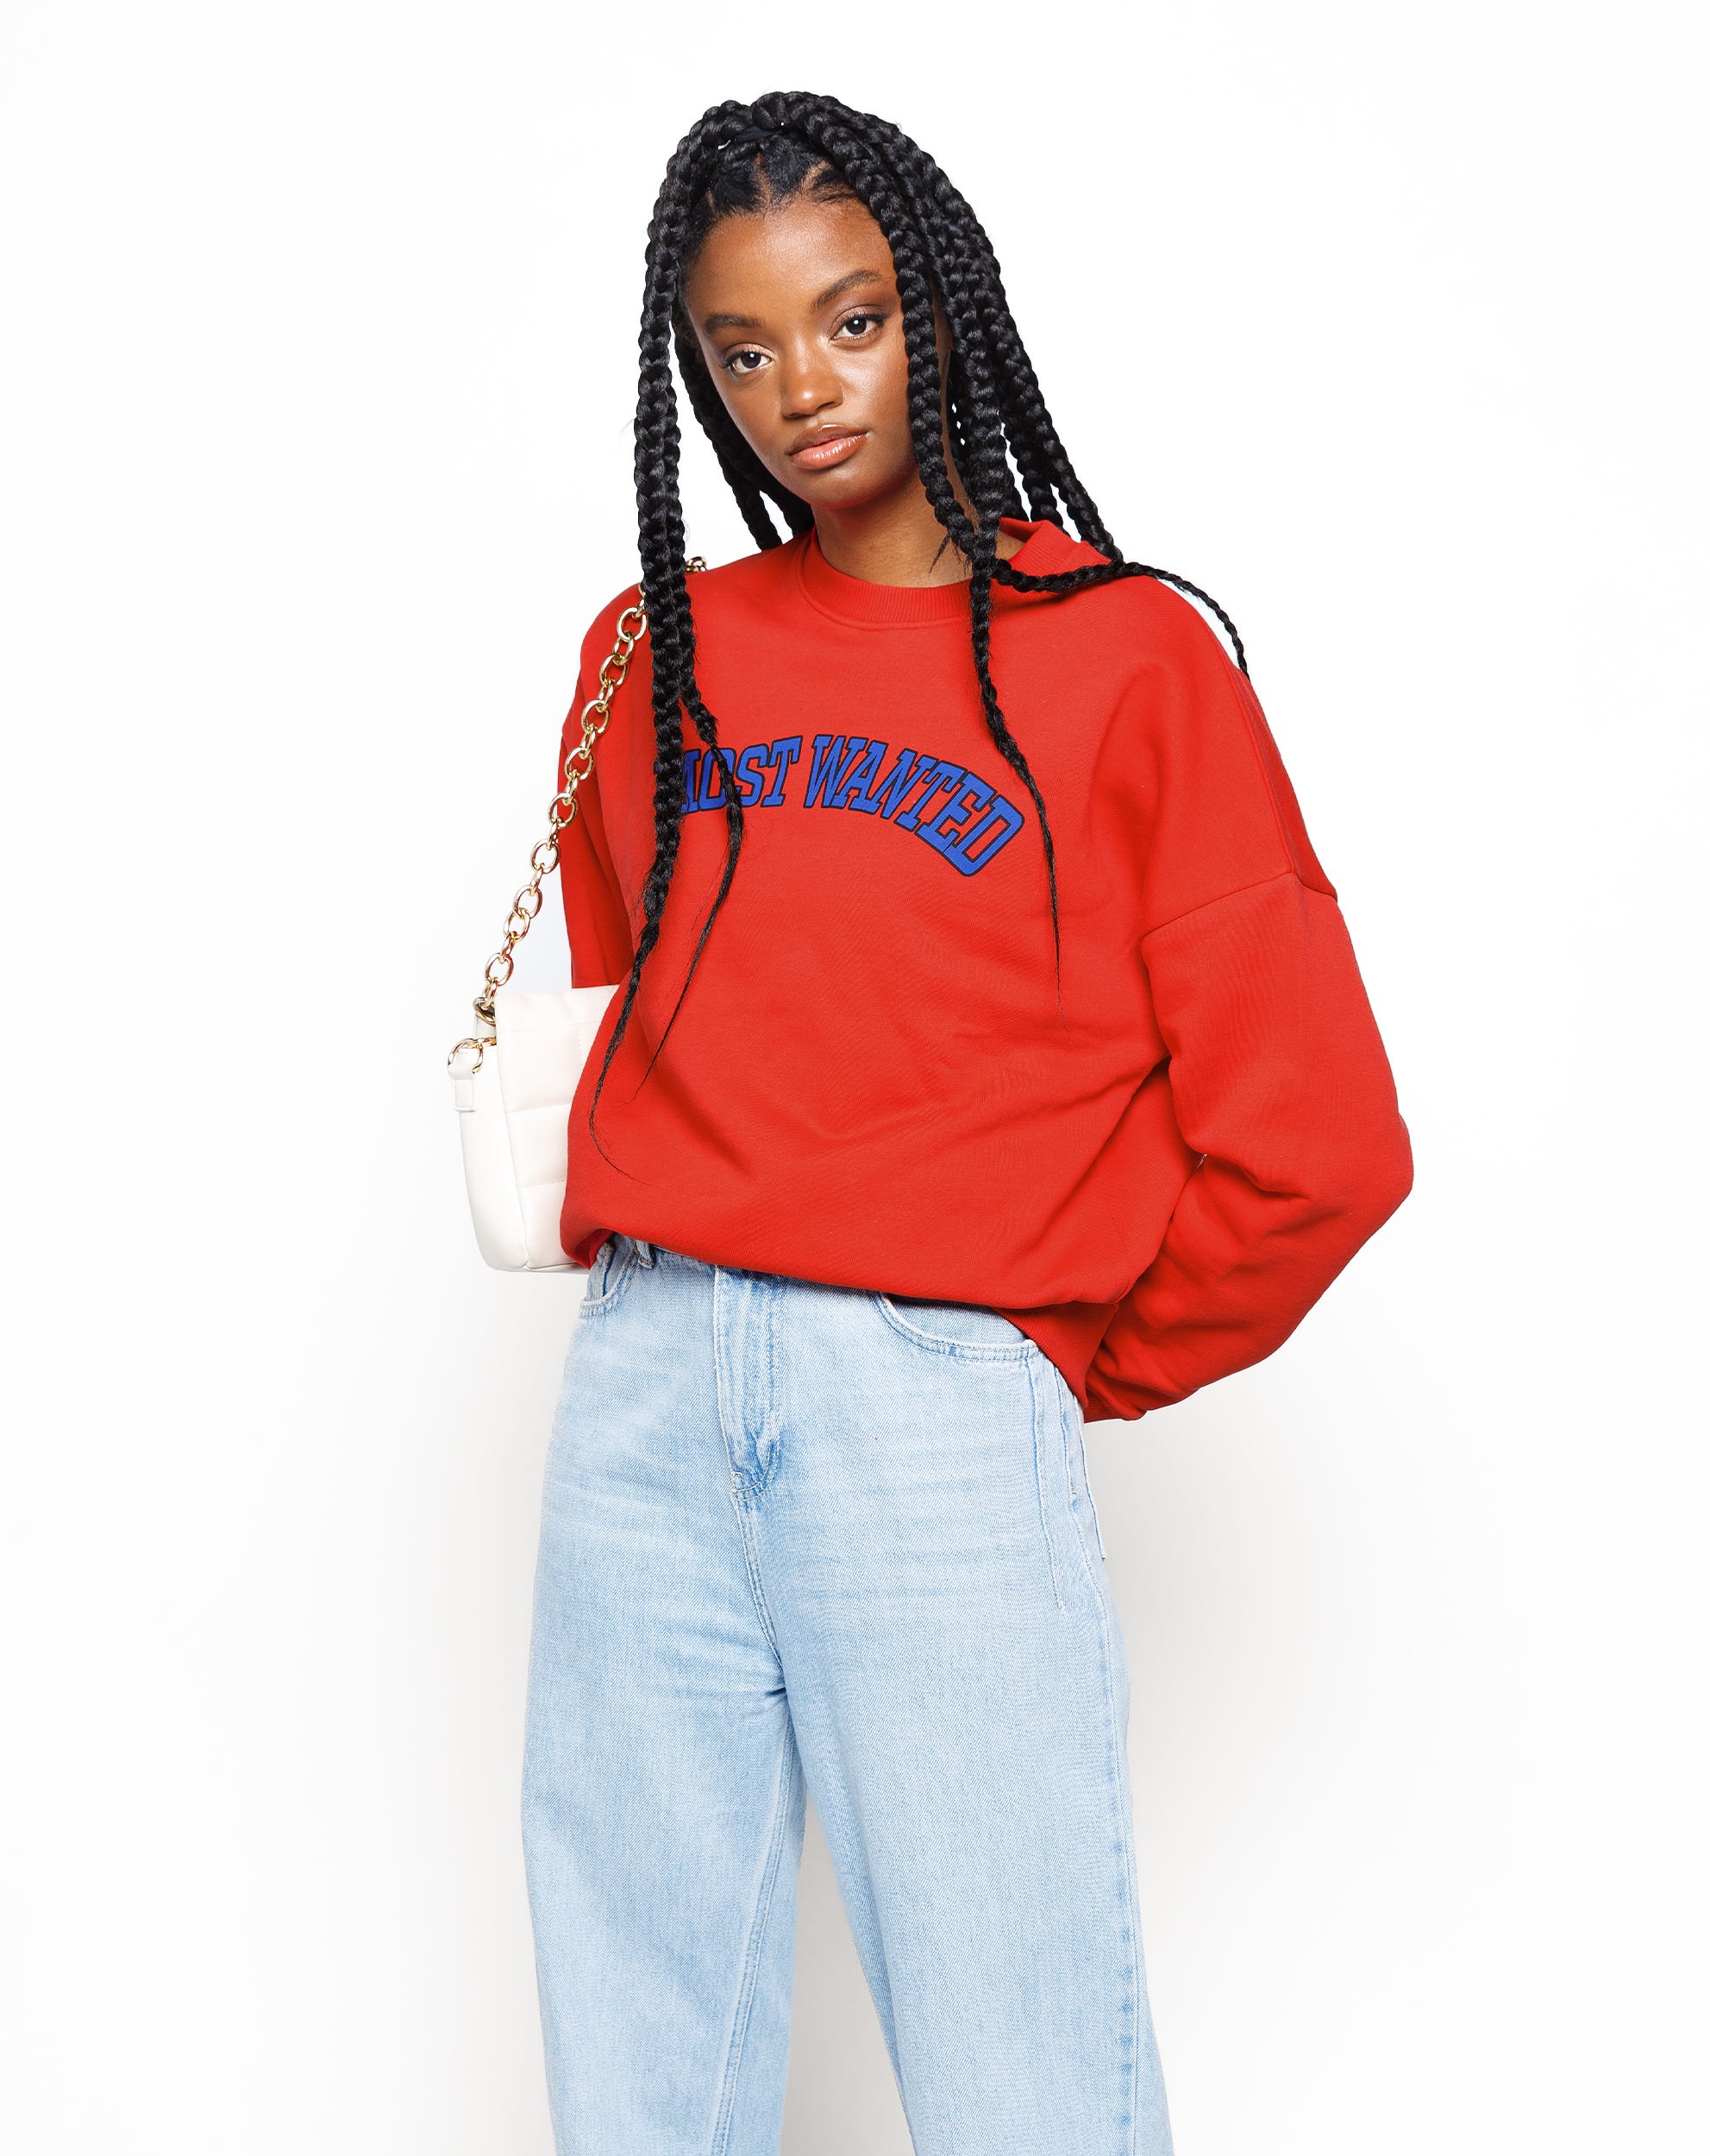 MOST WANTED SWEATER RED